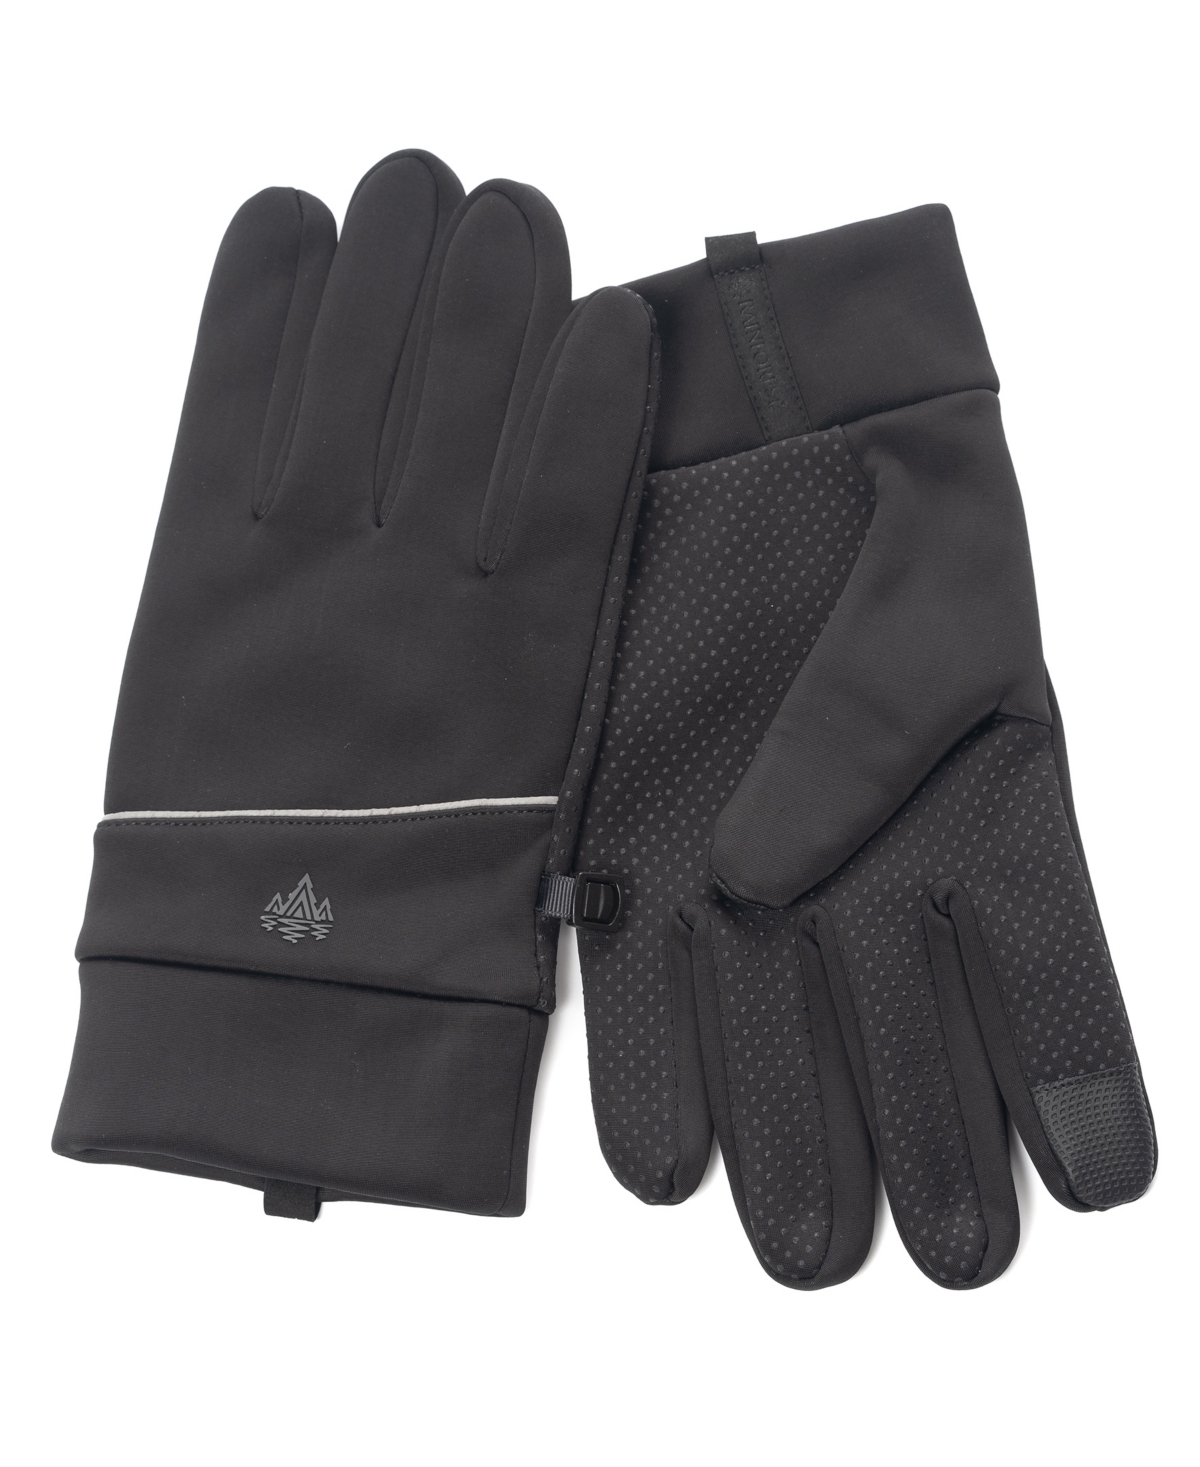 Men's Performance Outdoor Glove with Piping - Black